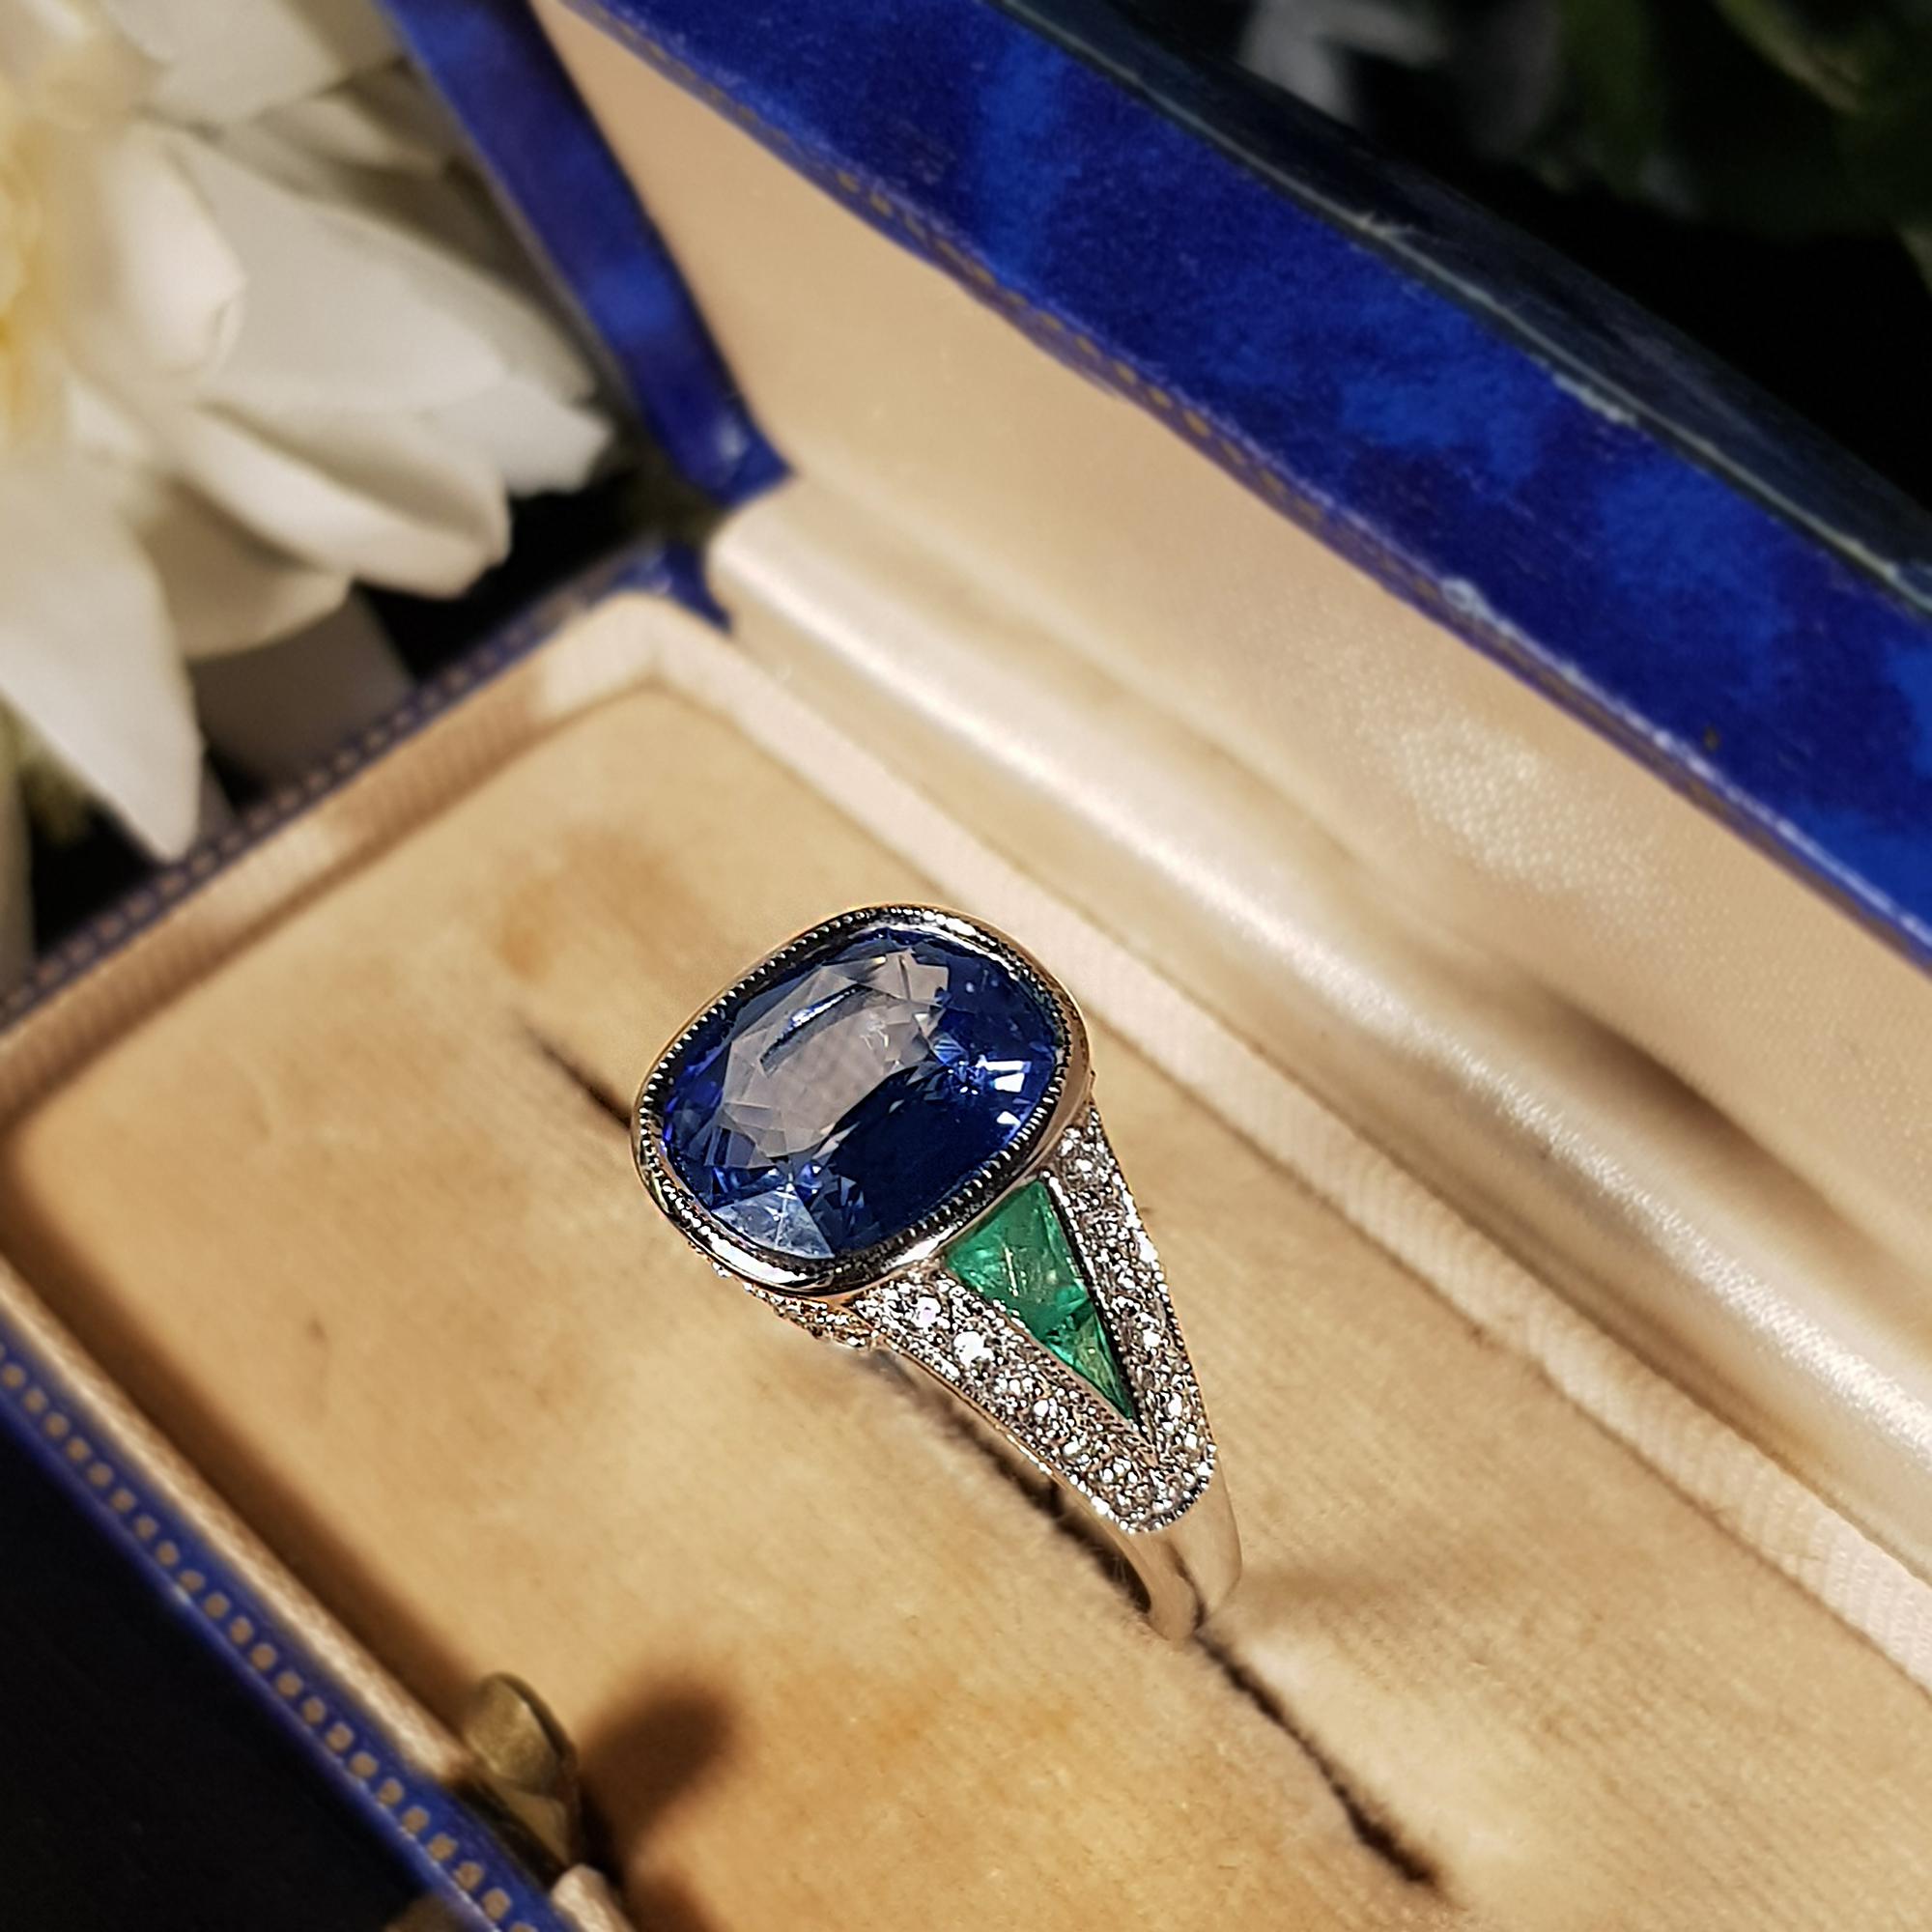 Oval Cut Certified 4.47 Ct. Ceylon Sapphire Emerald Diamond Ring in 18K White Gold For Sale